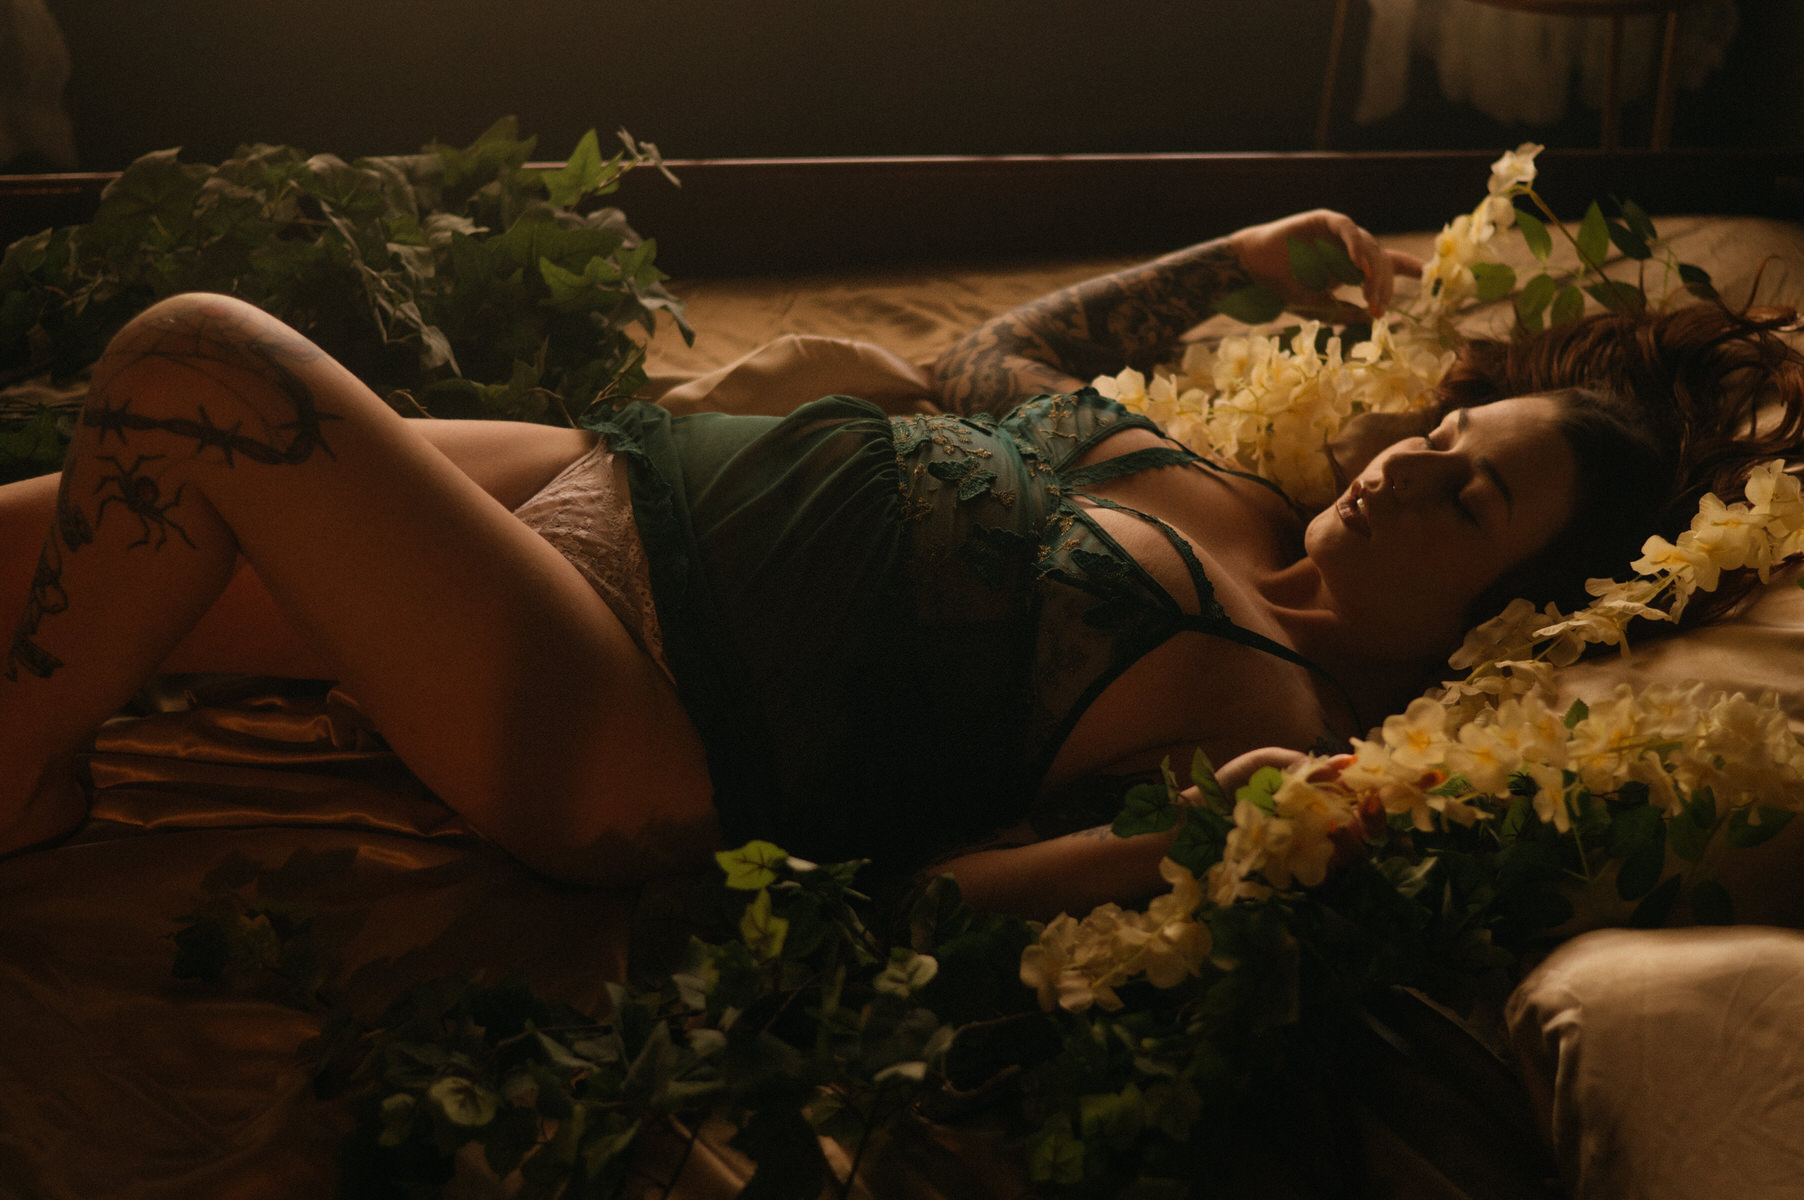 A woman, surrounded by a stunning array of flowers, gracefully poses on a bed in this captivating Dallas boudoir photography session.